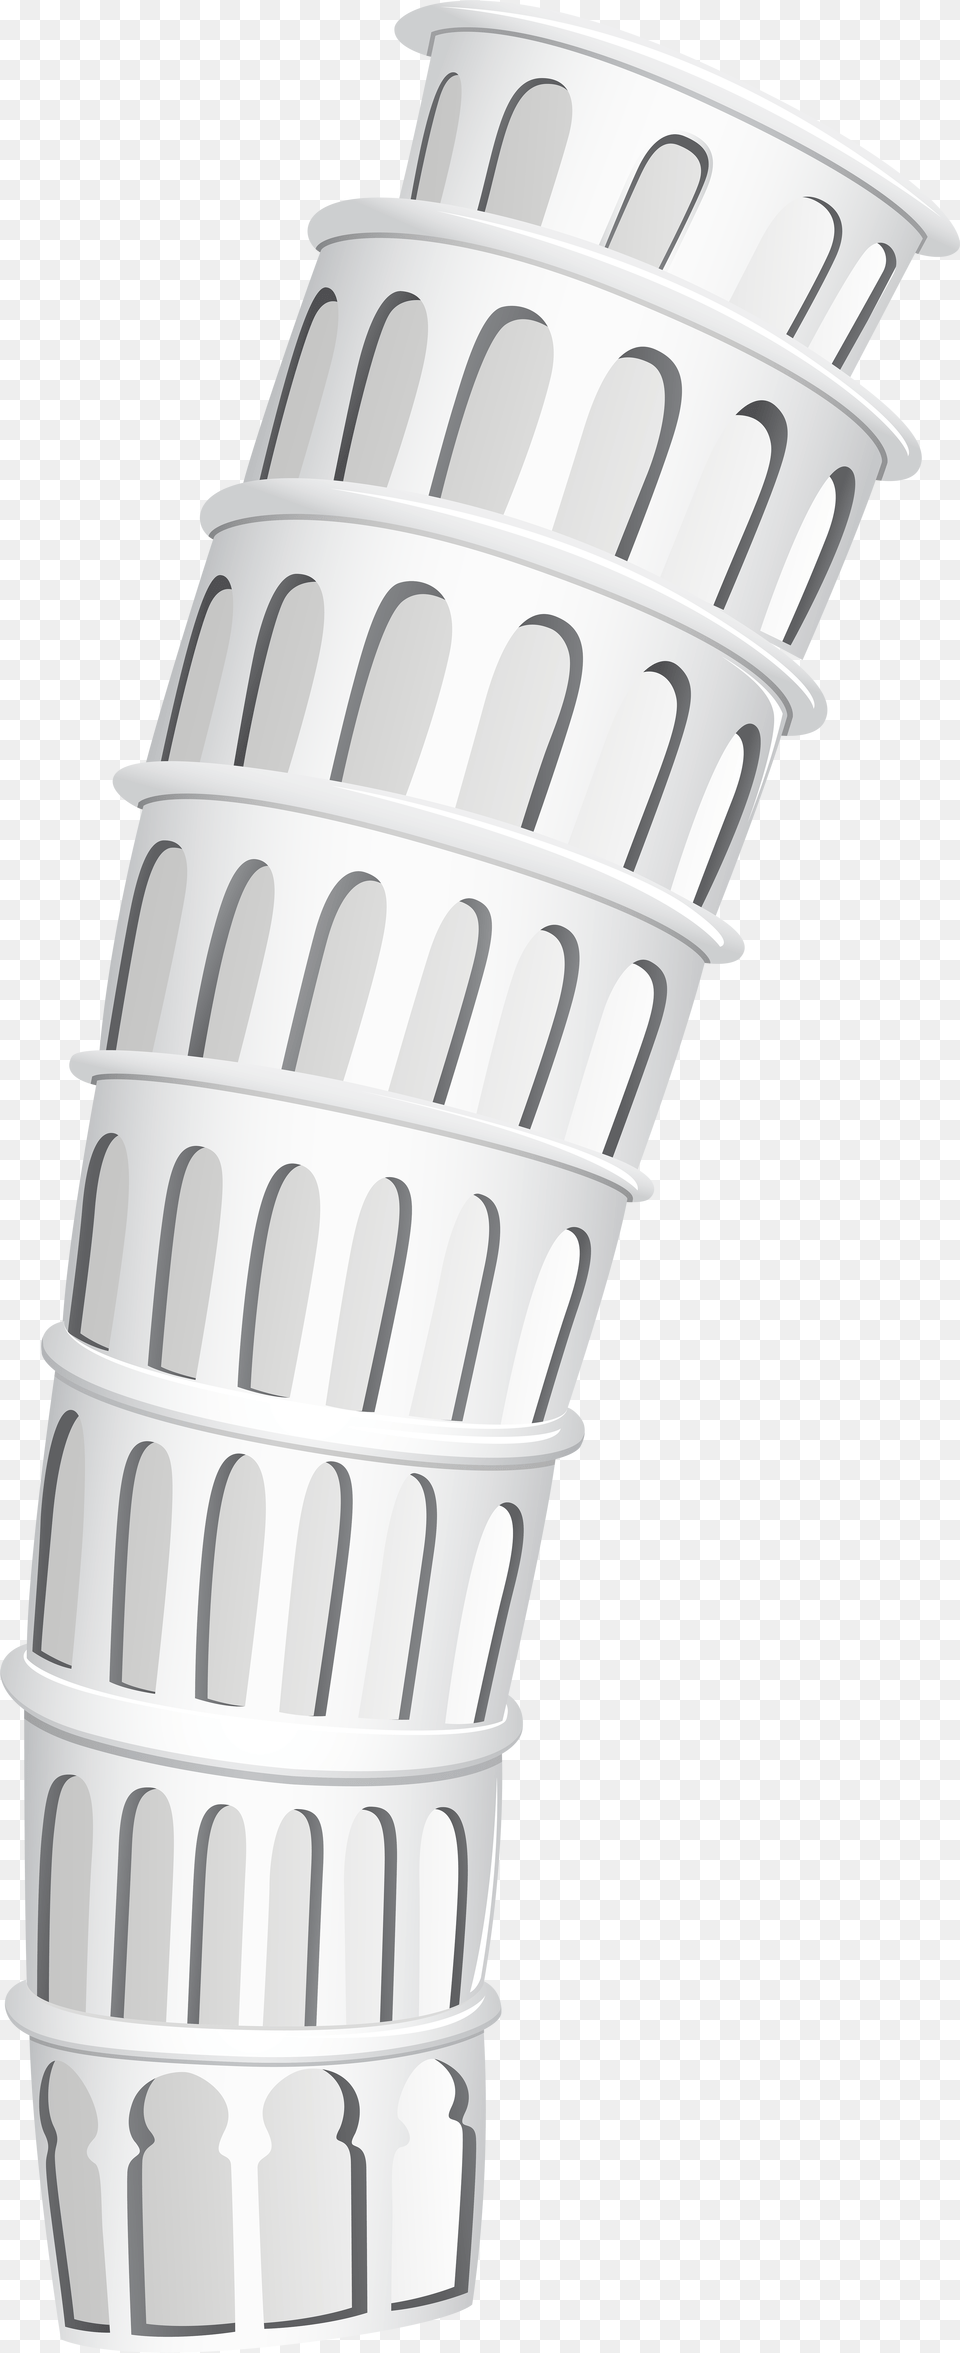 Leaning Tower Of Pisa Clip Art Leaning Tower Of Pisa, Crib, Furniture, Infant Bed, Cup Free Png Download